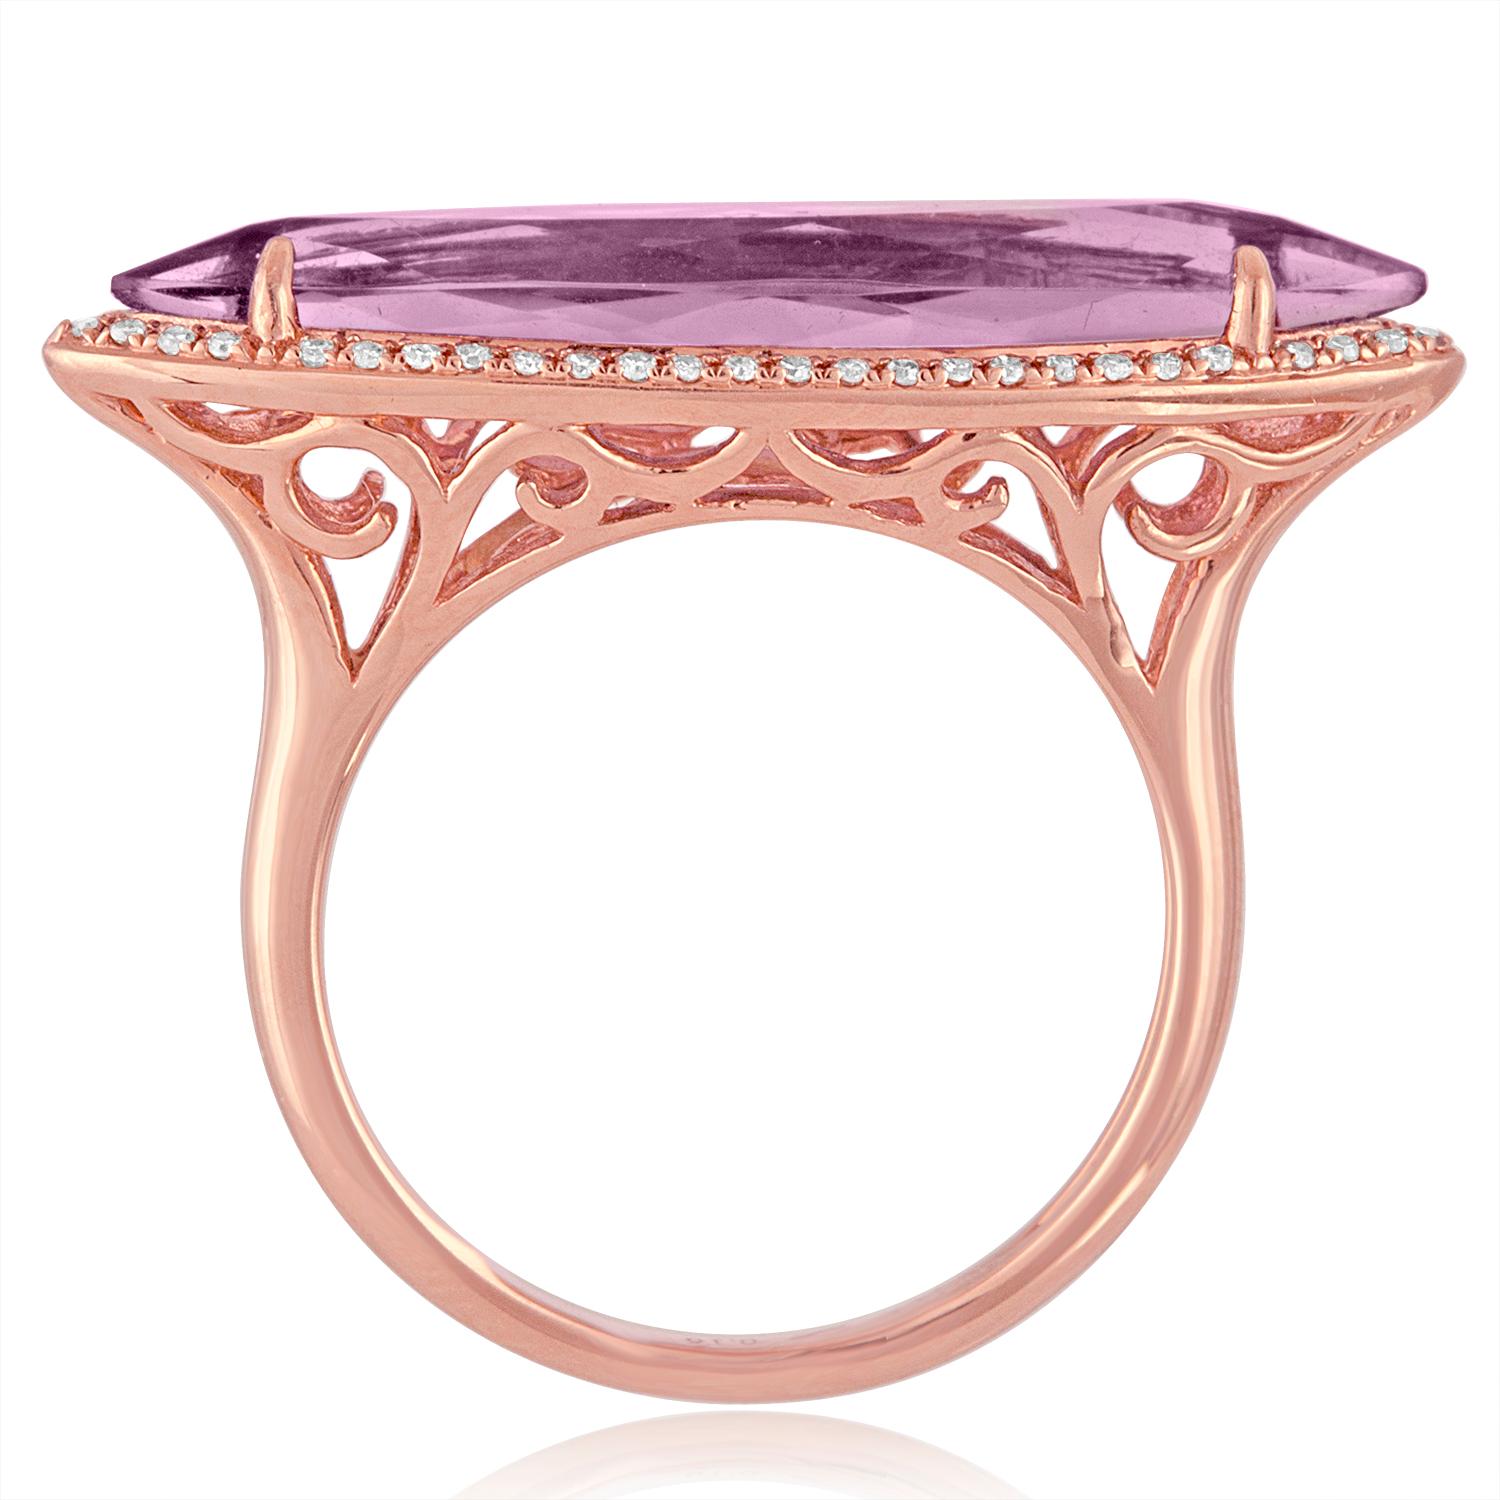 Very Unusual Horizontal Ring
The ring is 14K Rose Gold
The center stone is an Marquise Amethyst 3.59 Carats
There are 0.16 Carats in Diamonds H/I VS2/SI1
The top of the ring measures a little over 1